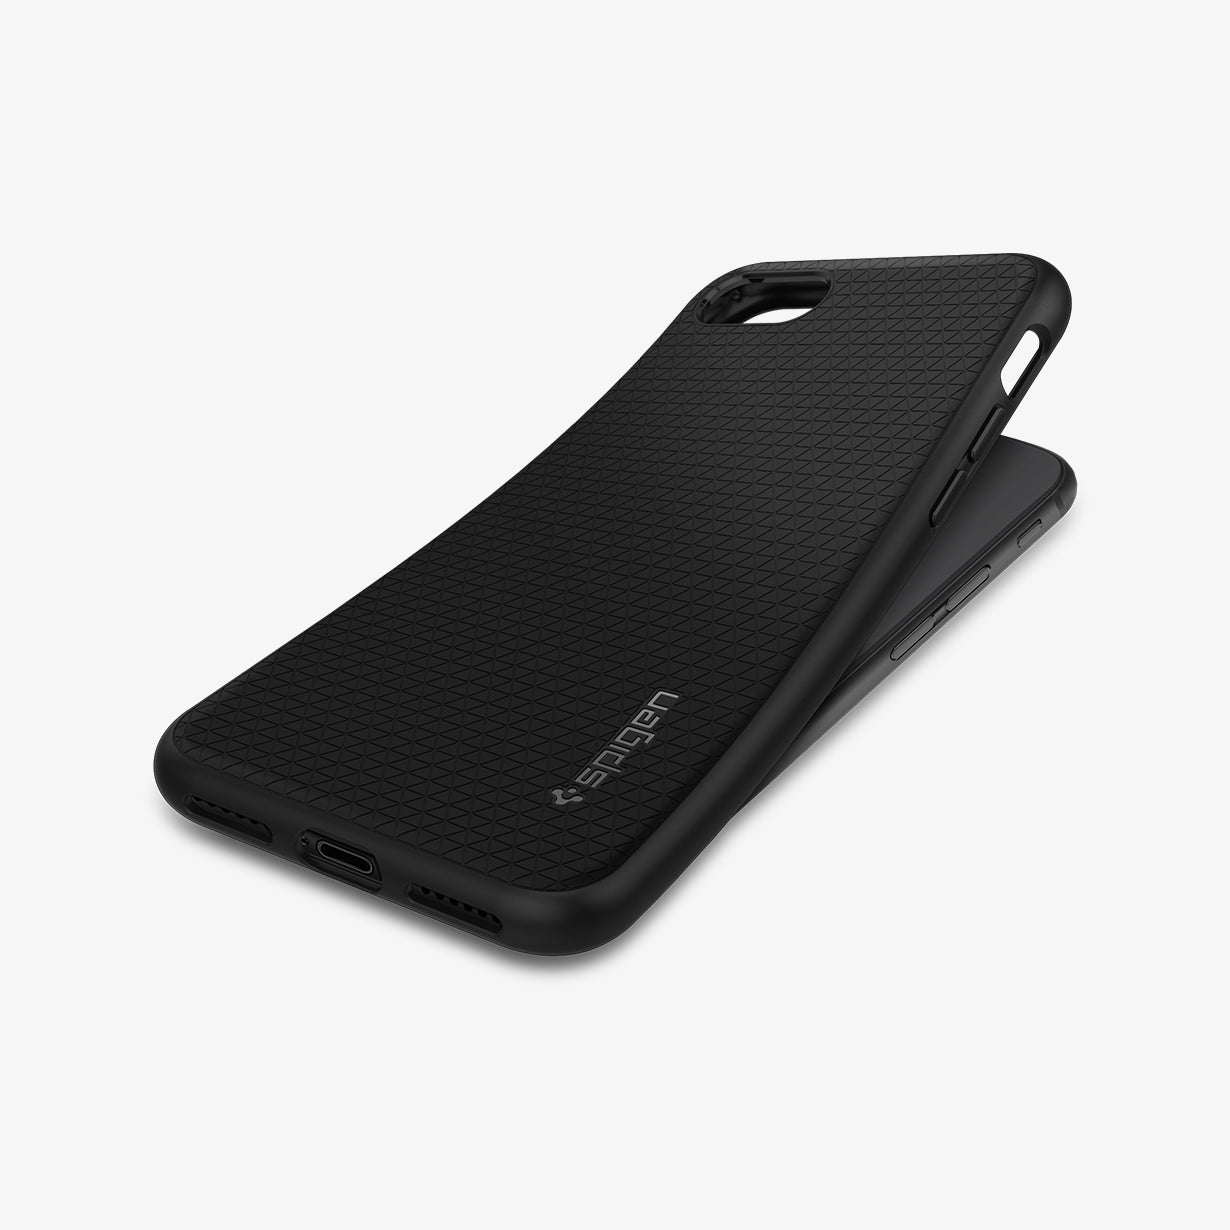 042CS20511 - iPhone SE Liquid Air case in black showing the back laying flat